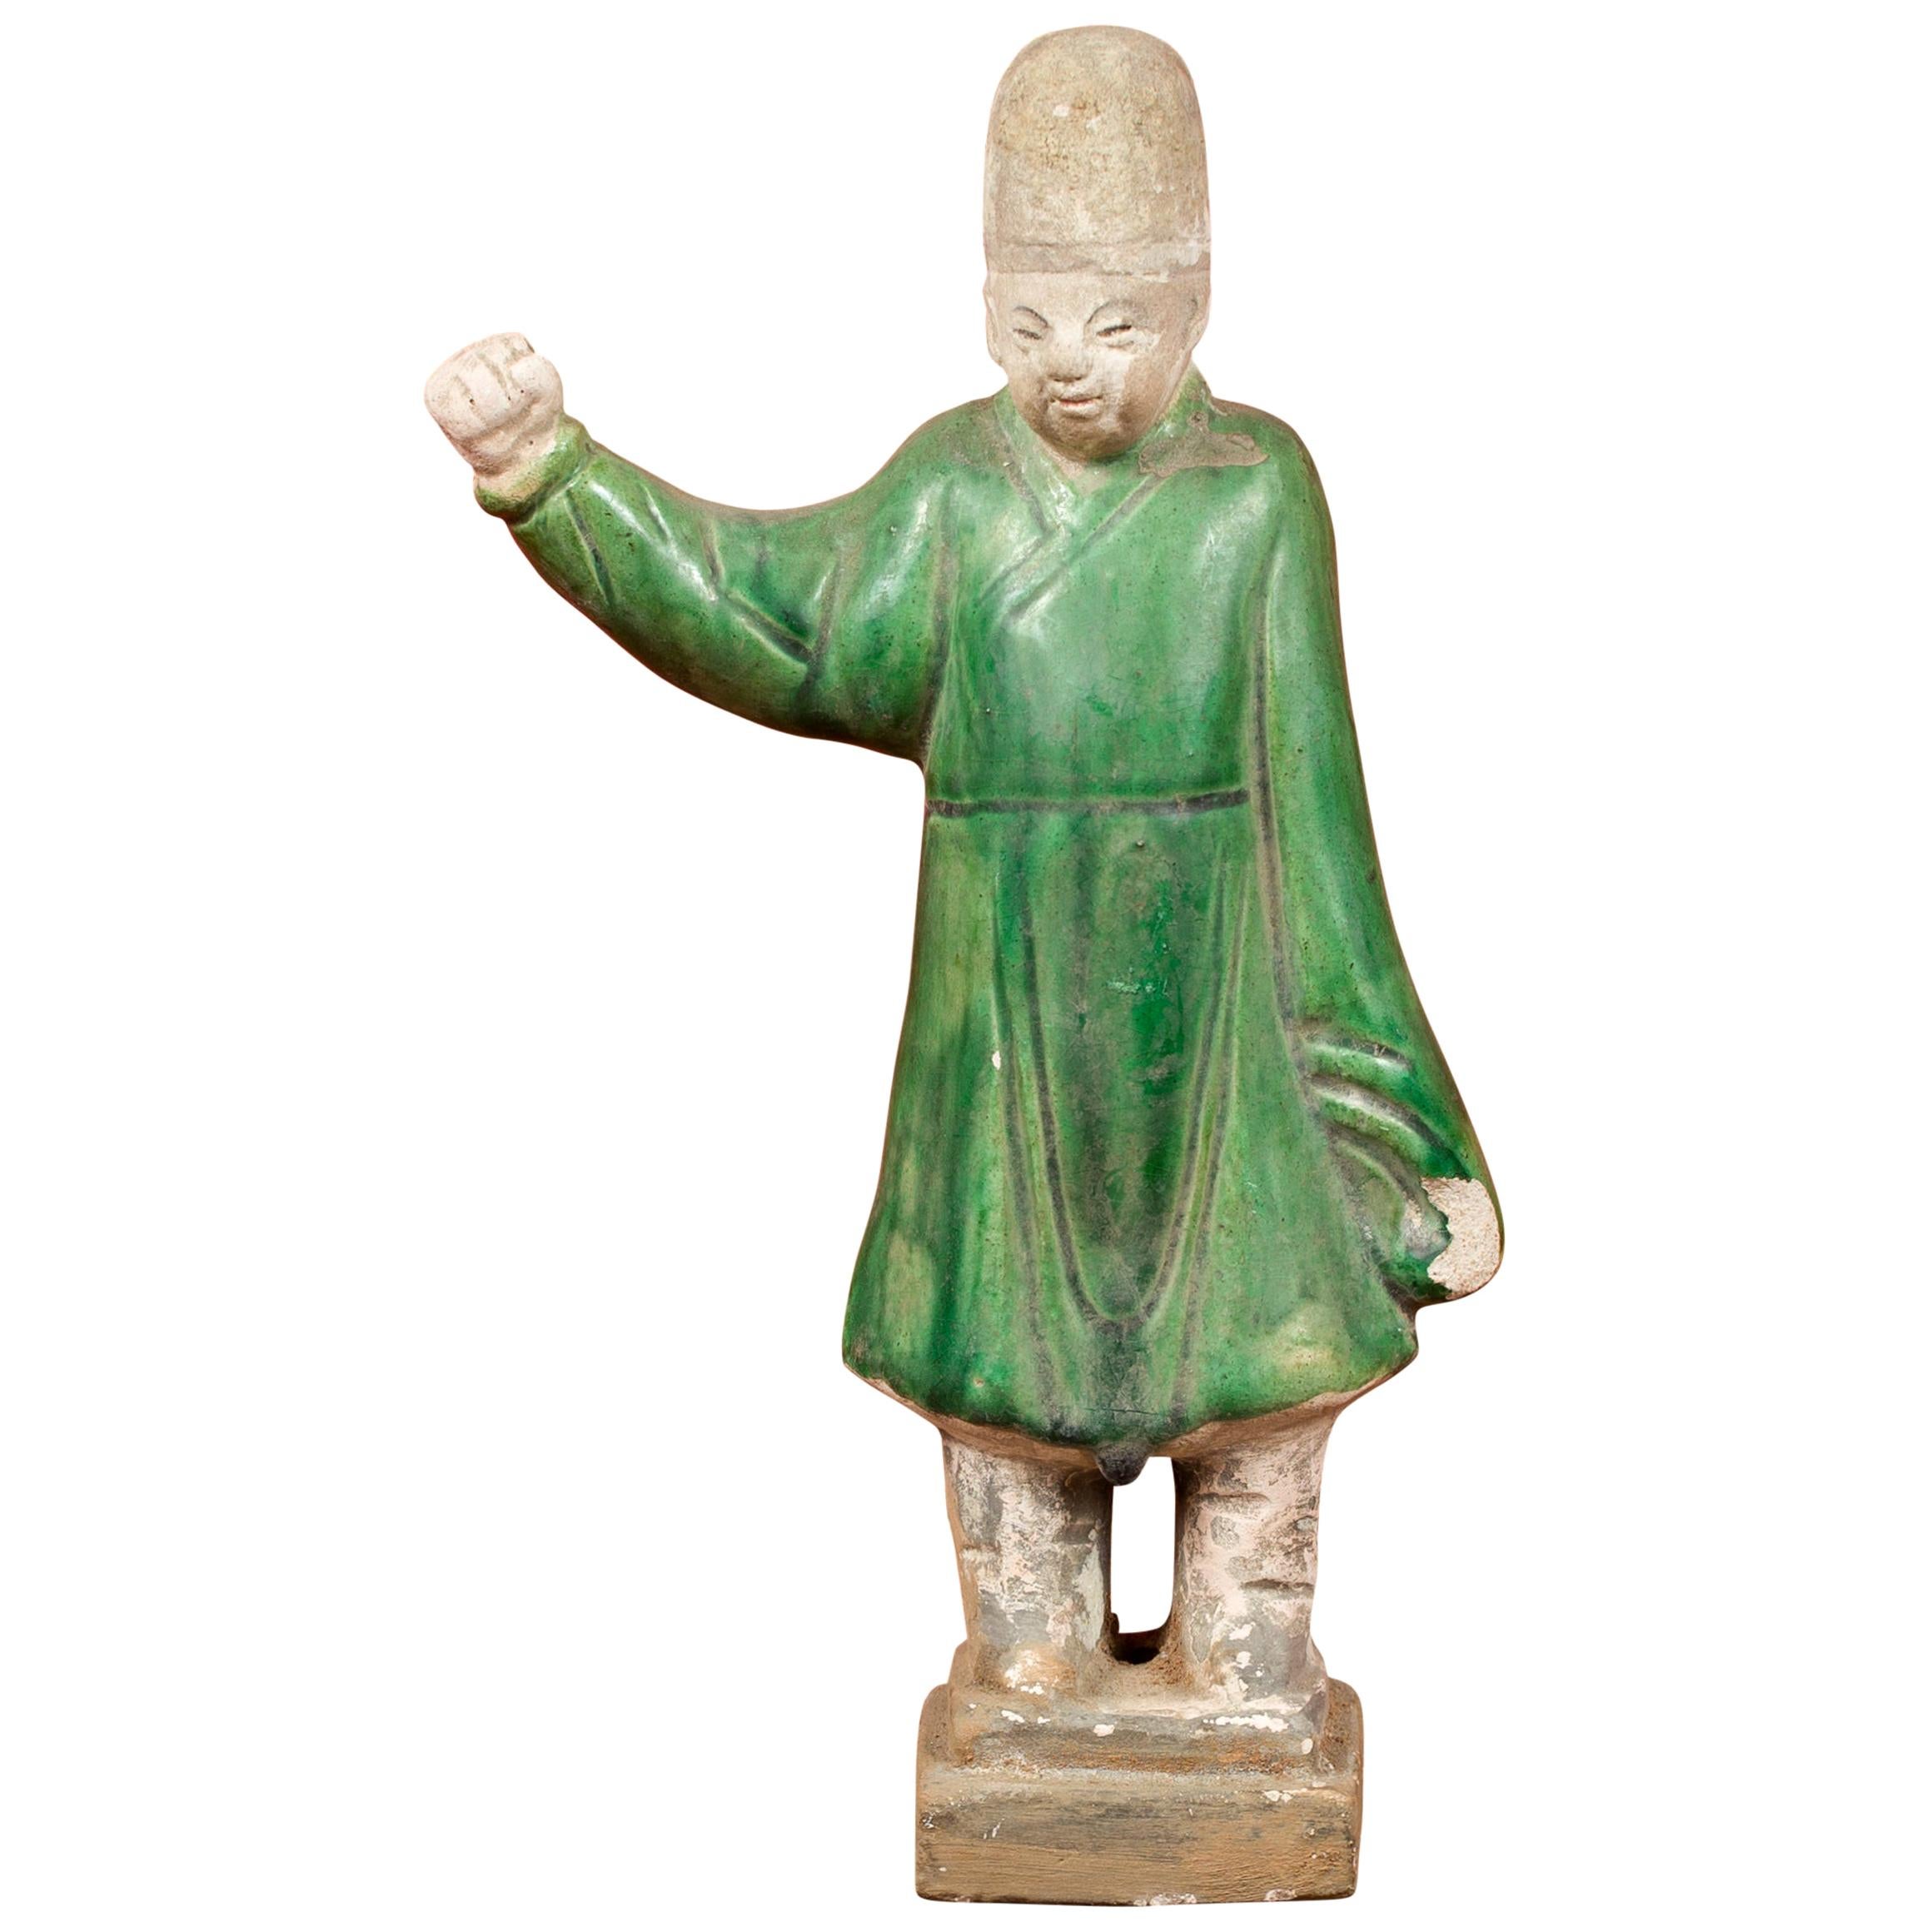 Chinese Ming Dynasty Terracotta Official Statuette with Original Polychromy